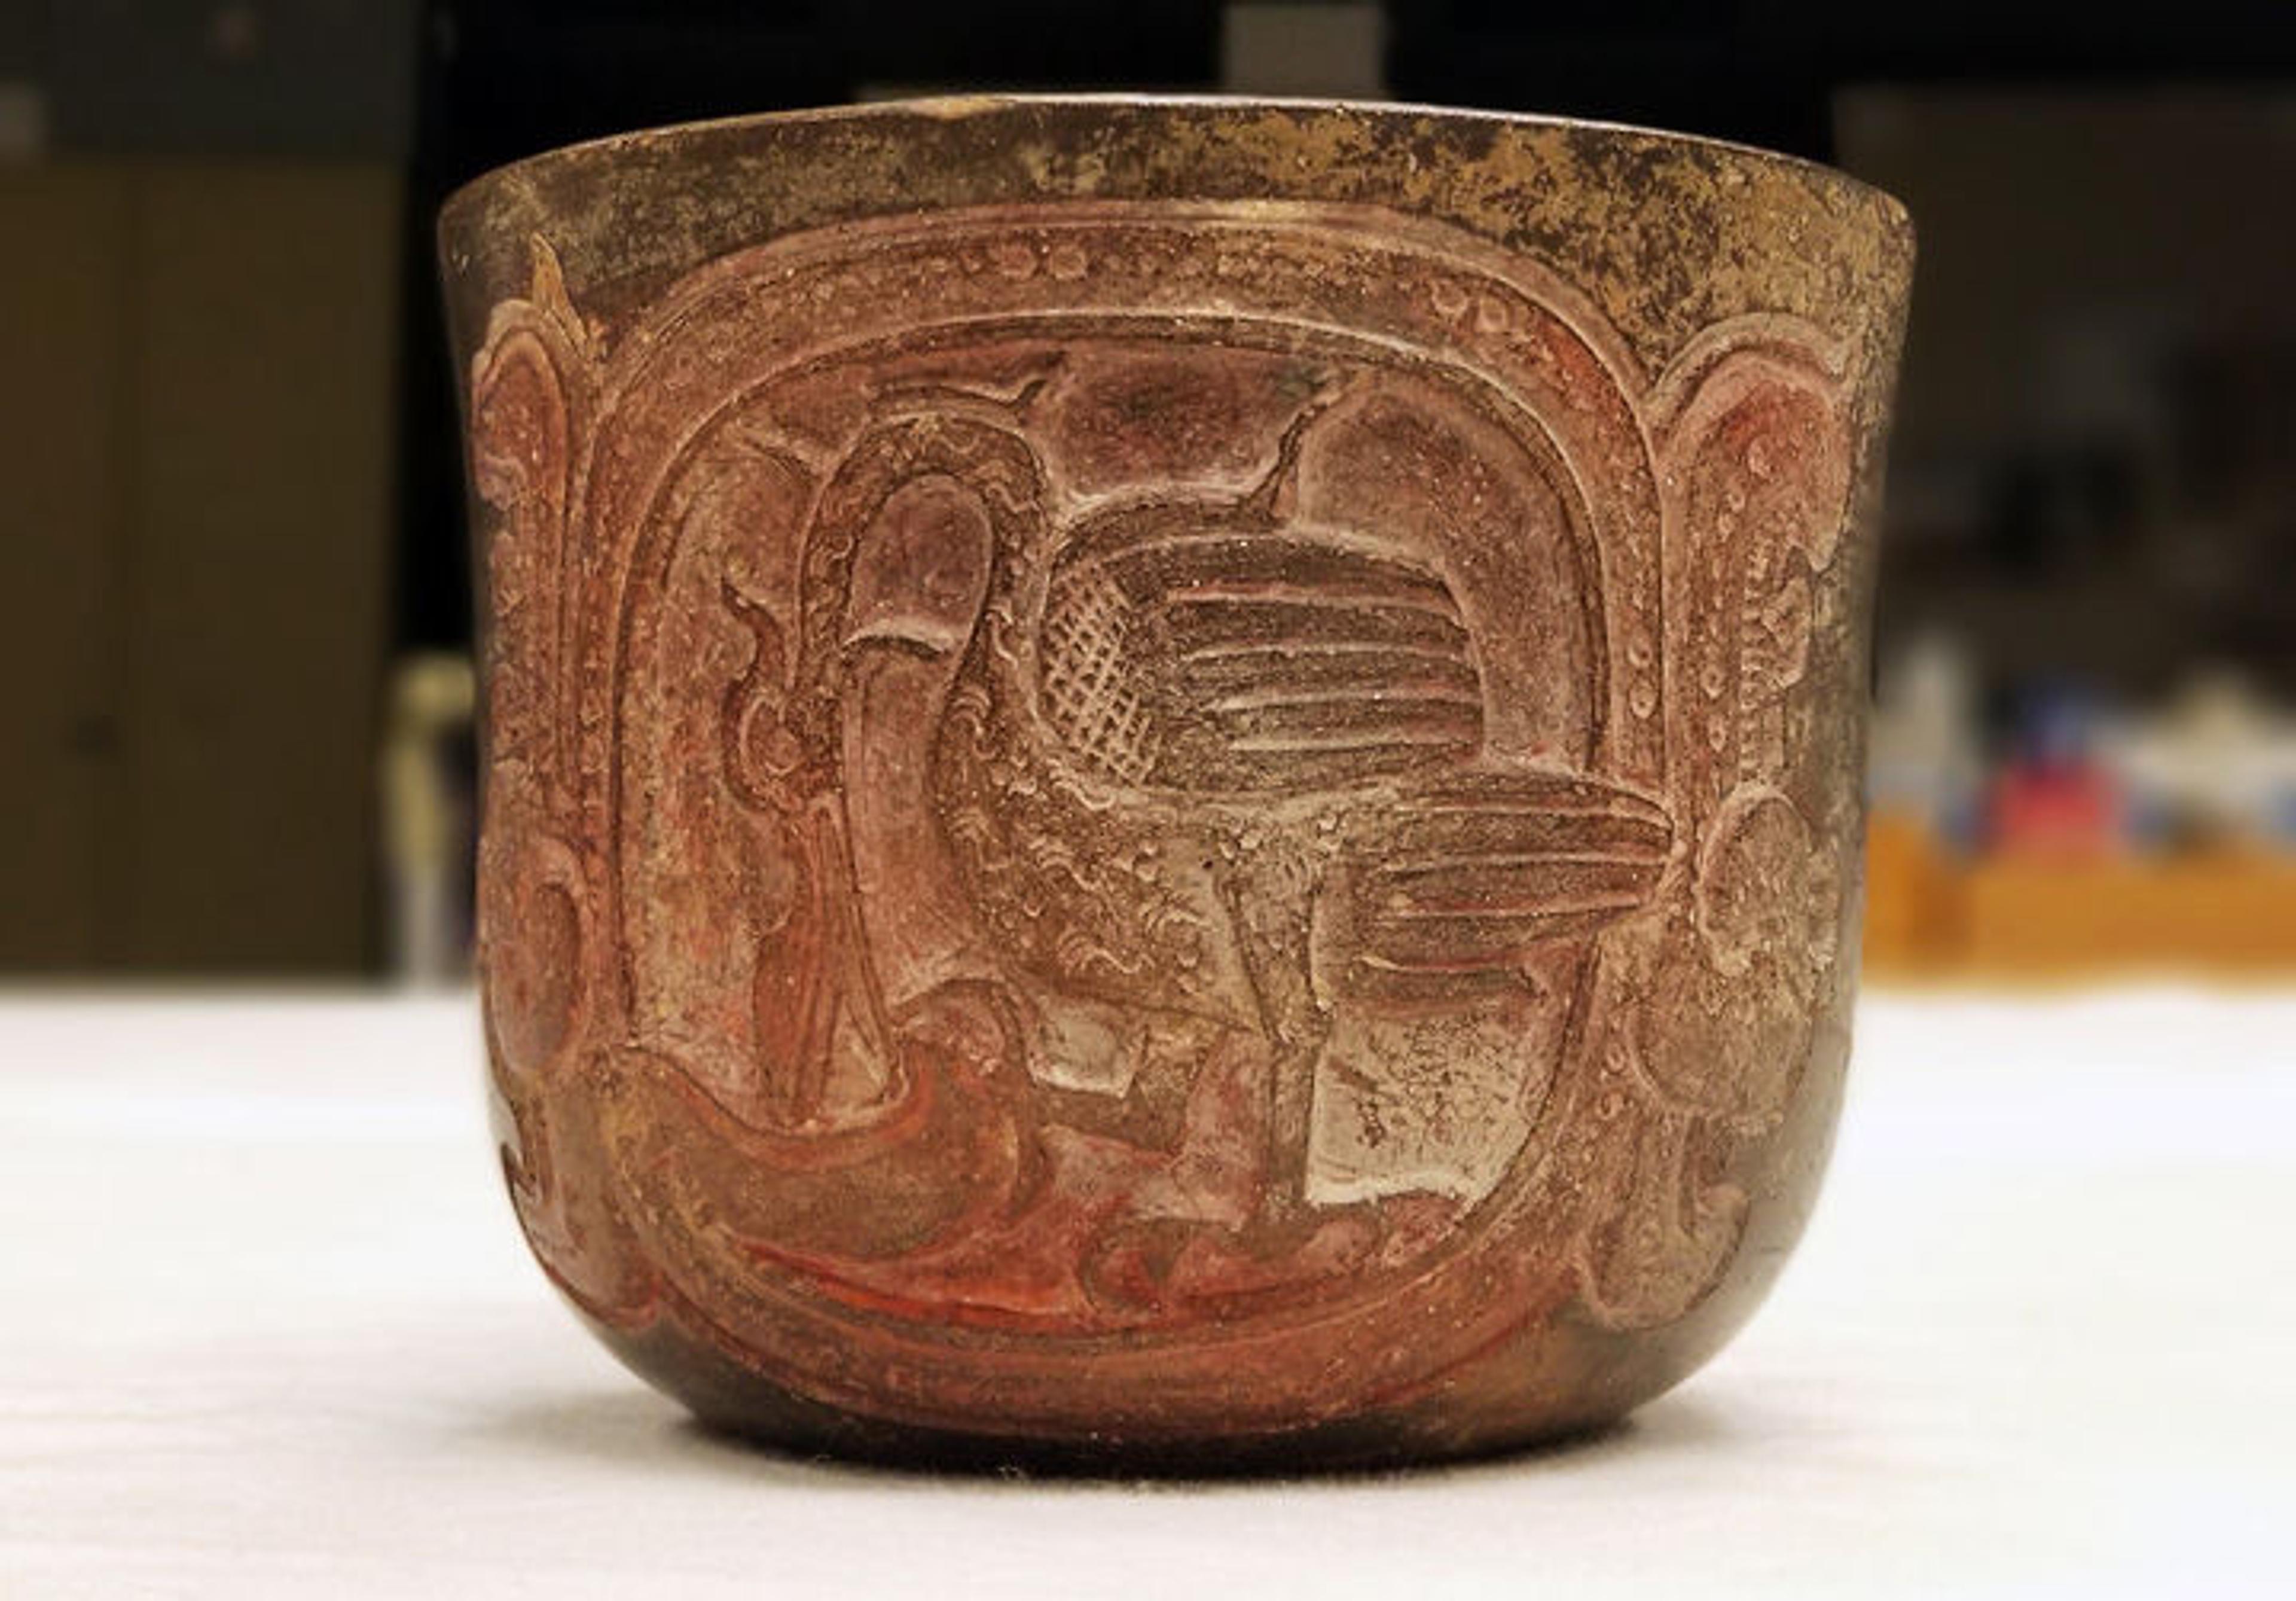 A Mexican drinking vessel featuring a depiction of a water bird and hieroglyphic text